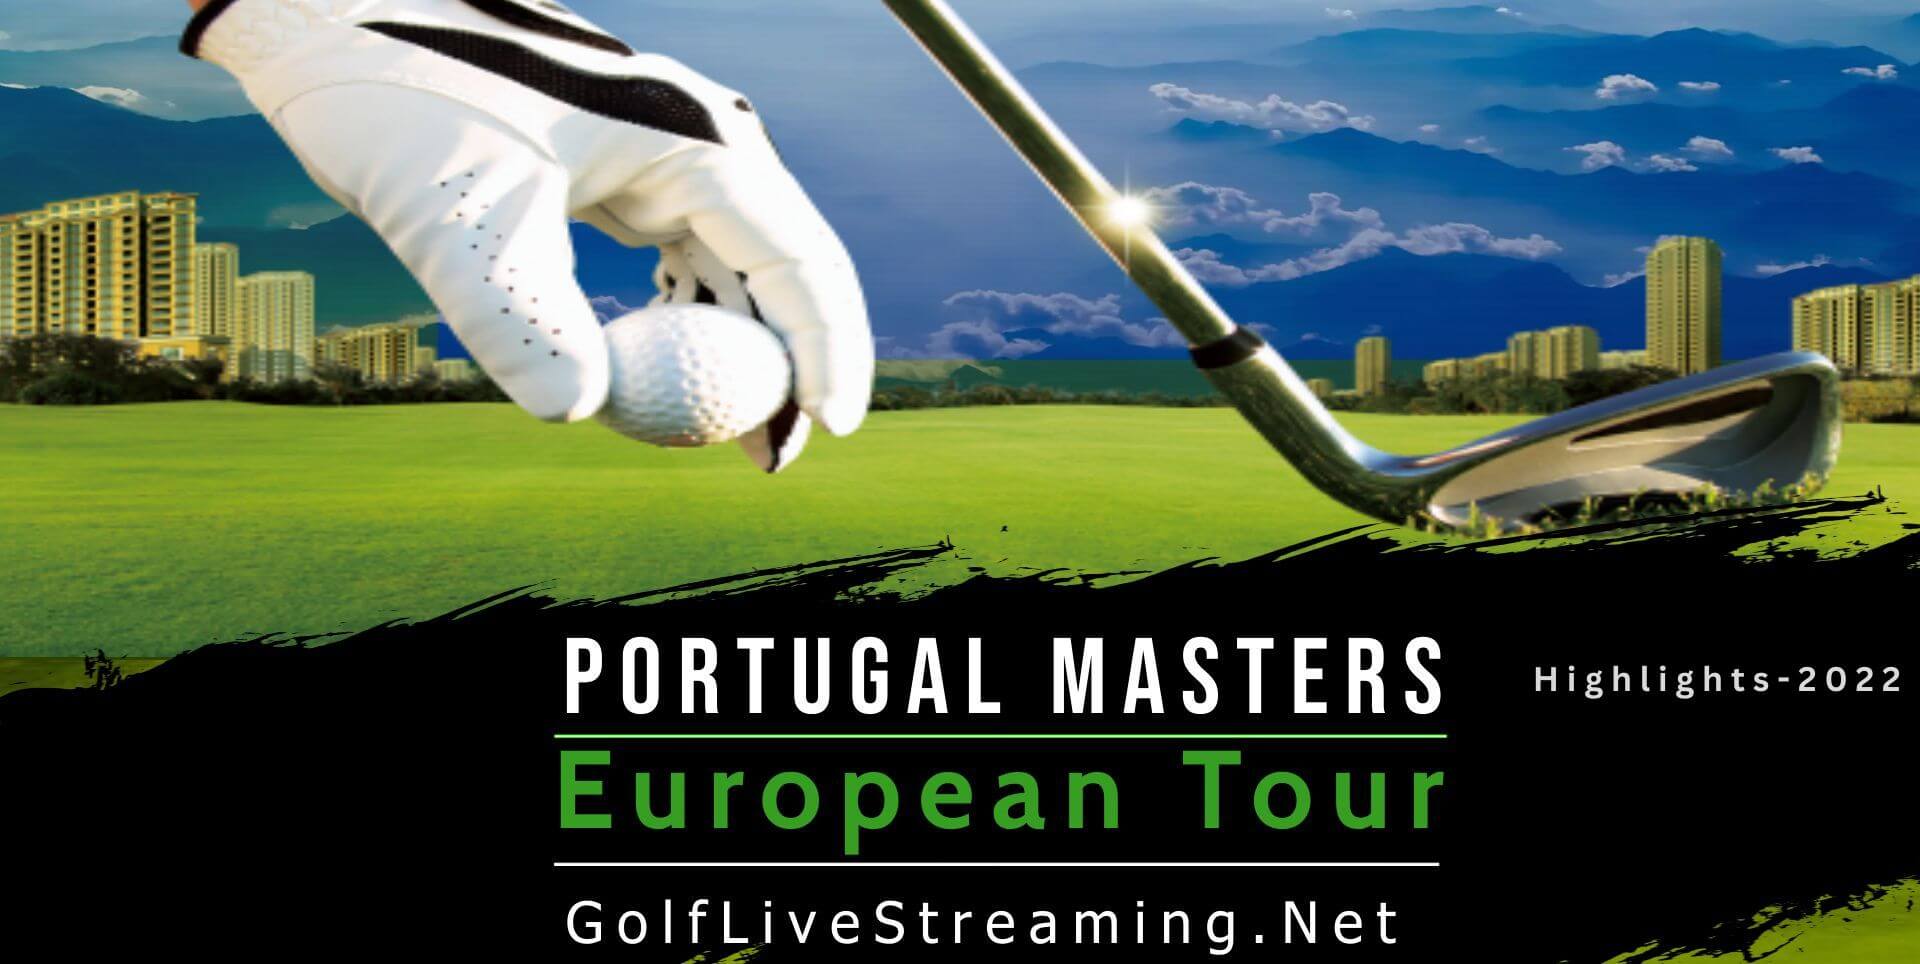 Portugal Masters Round 3 Highlights 202 European Tour